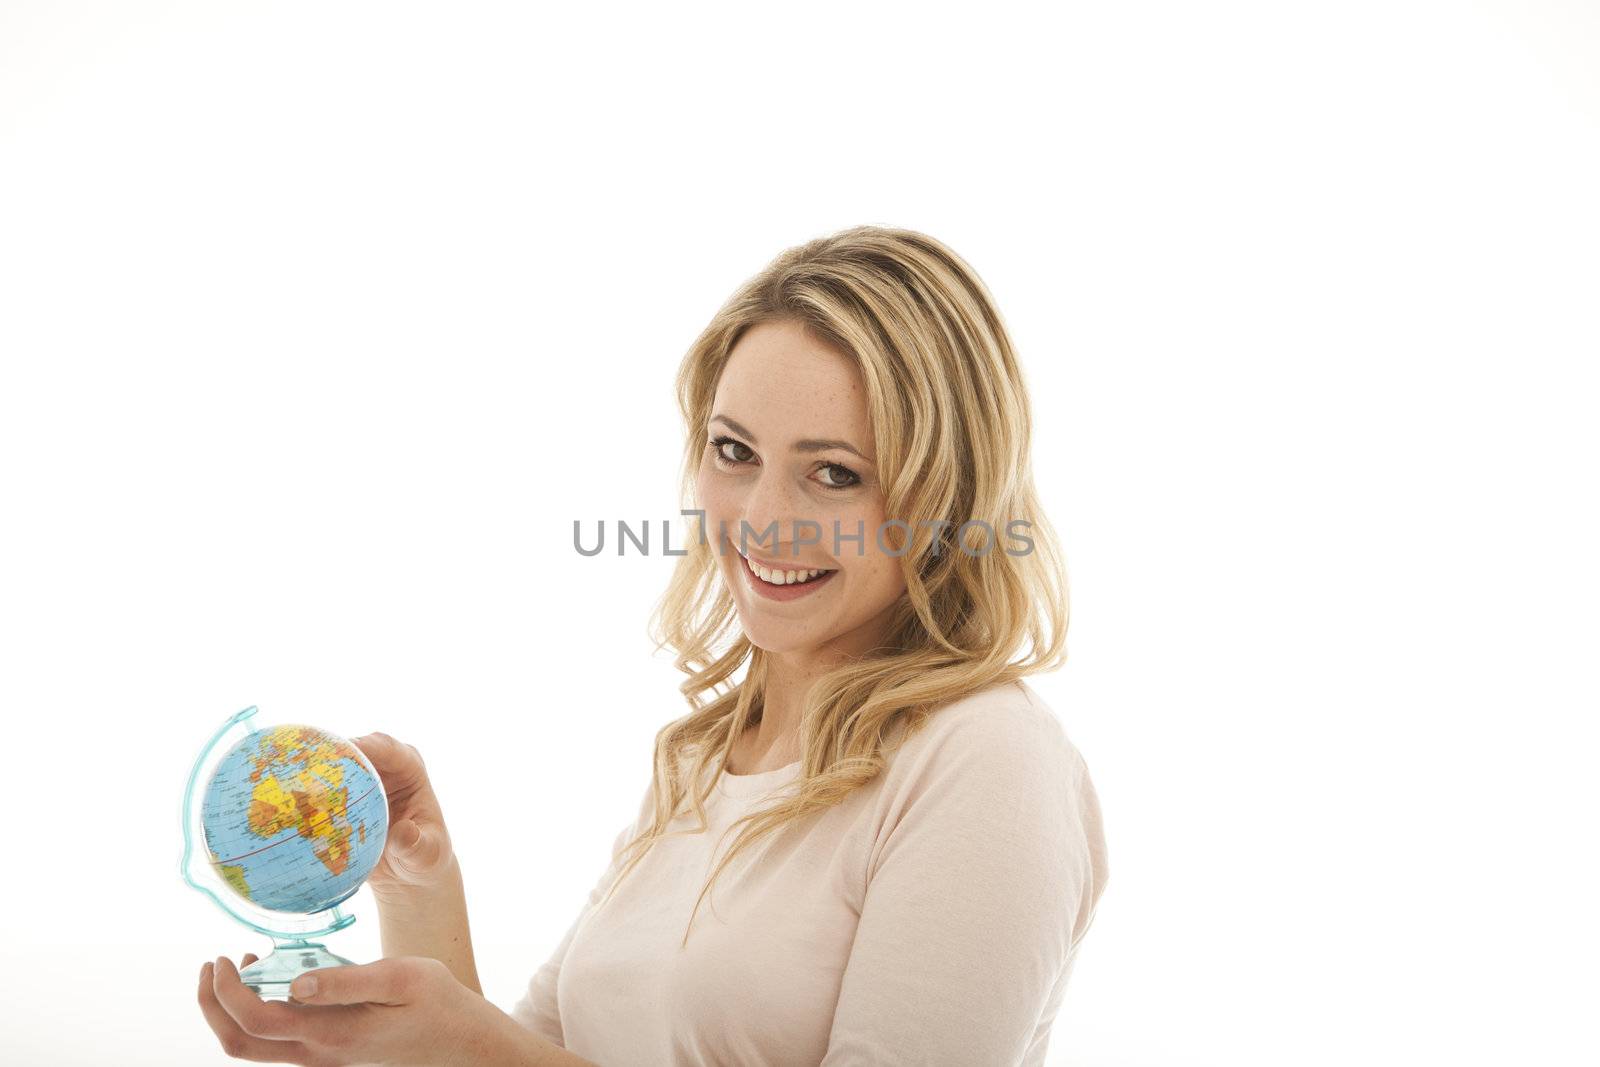 Smiling woman holding globe by Farina6000